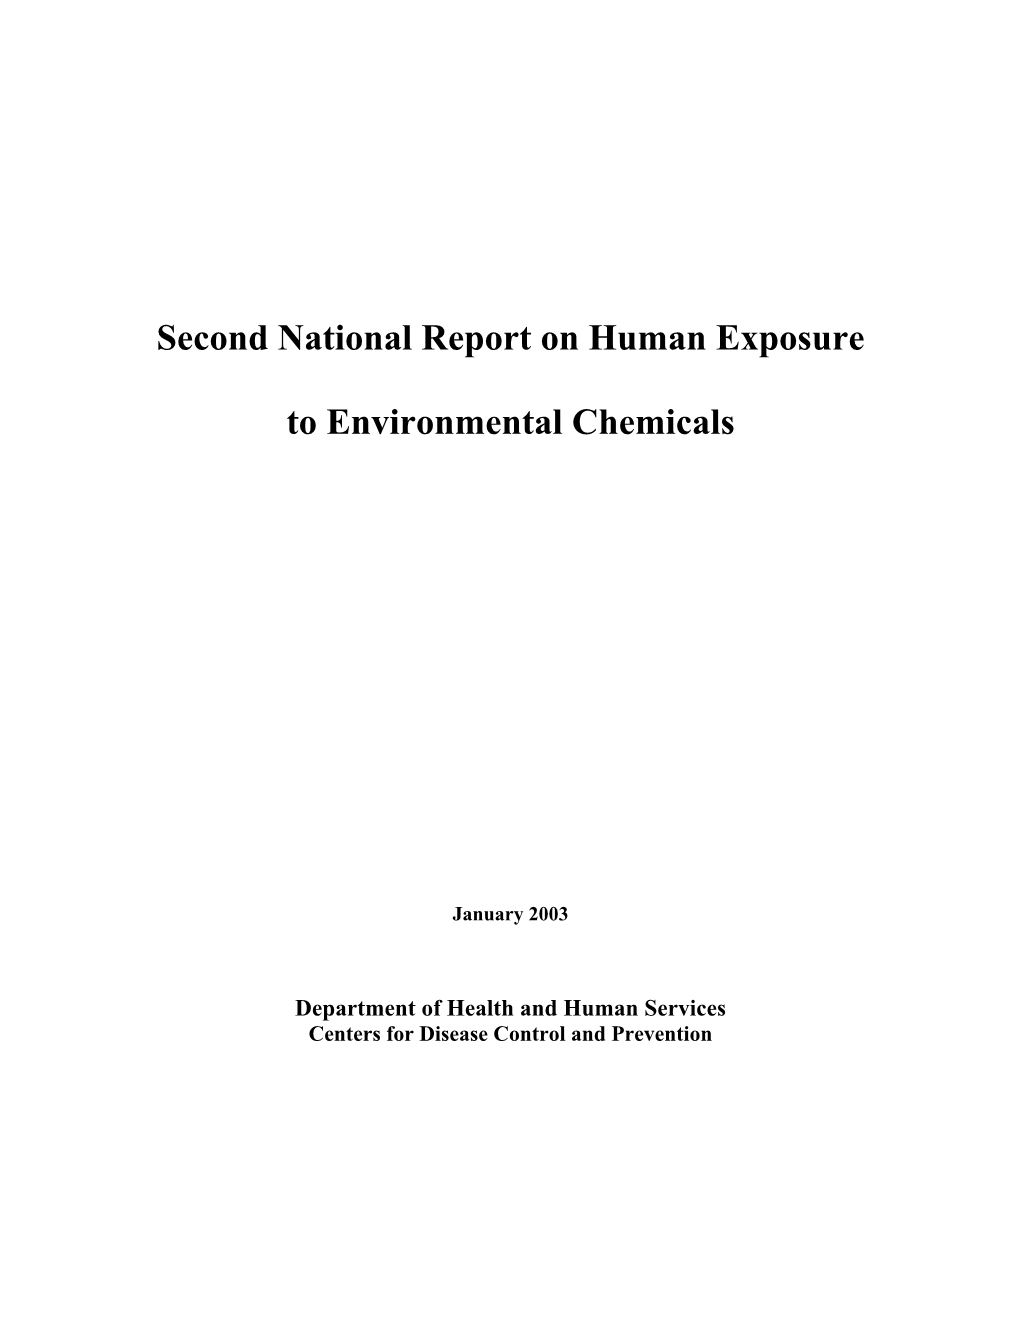 Second National Report on Human Exposure to Environmental